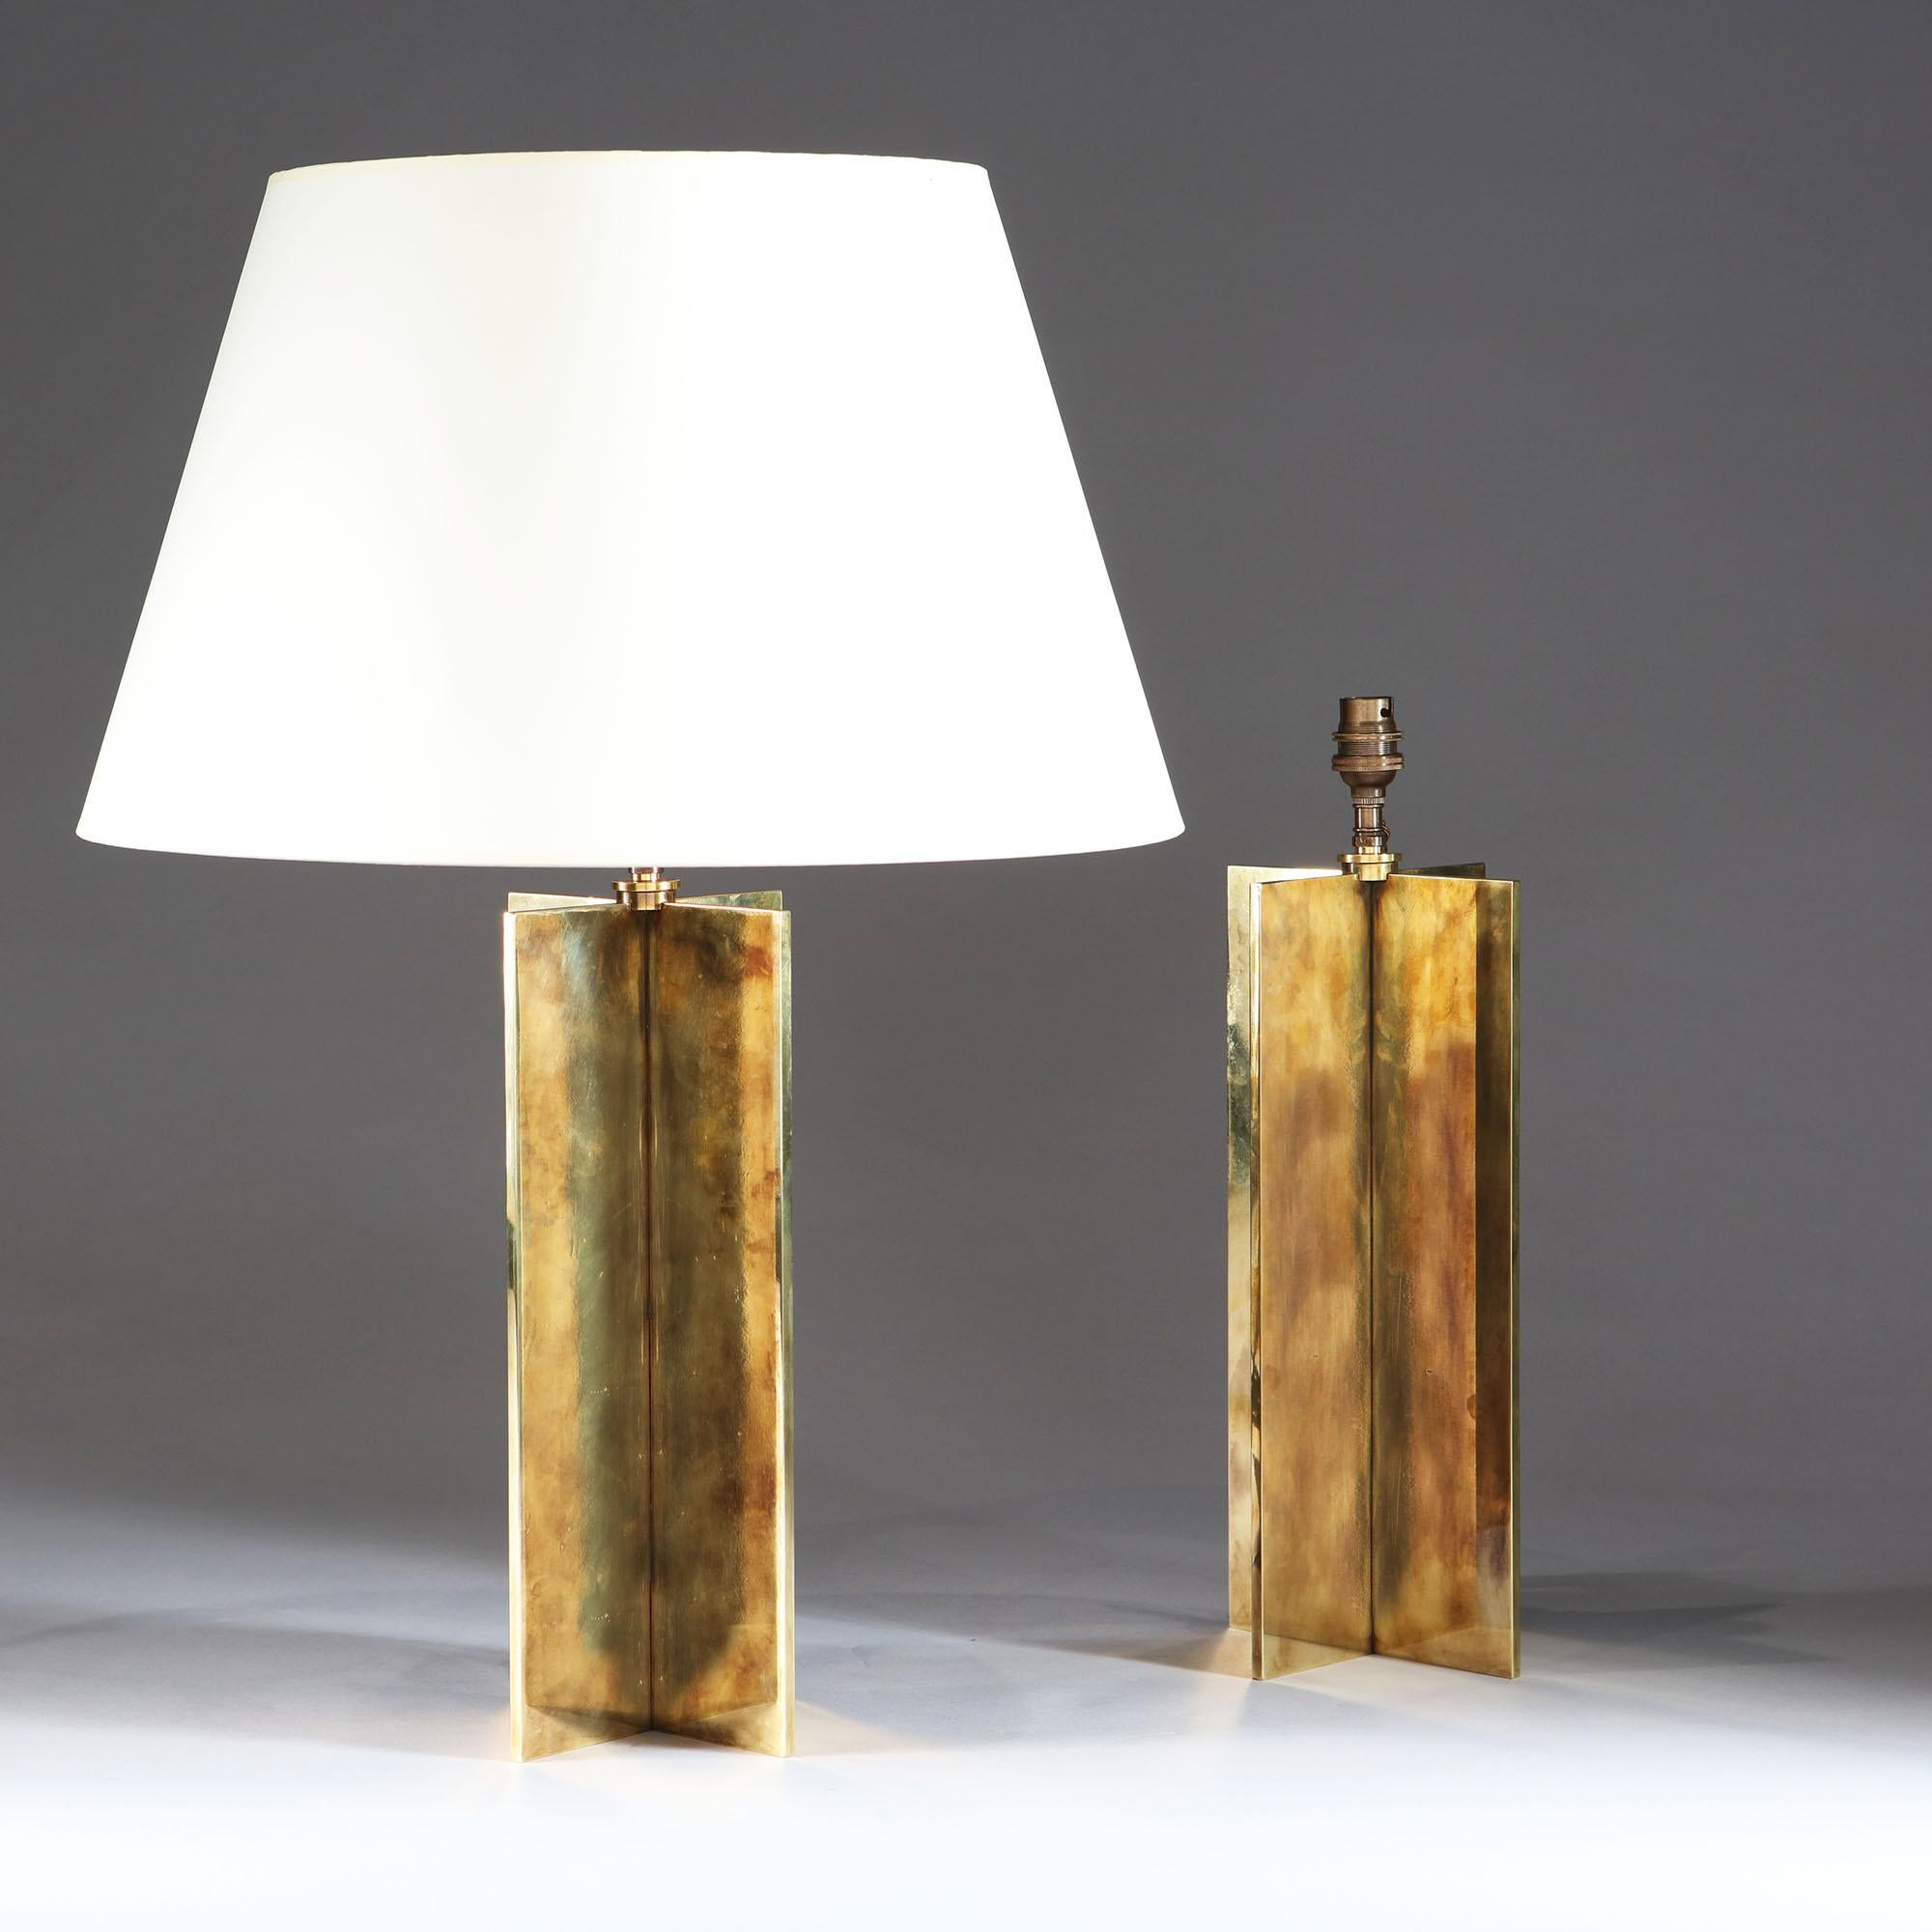 England, modern

A pair of X form brass lamps with surface patination, after a design by Jean Michel Frank.

Lead time: 4-6 weeks. Please enquire for stock availability.

Height of lamp 35.00cm
Height with shade 65.00cm
Width of base